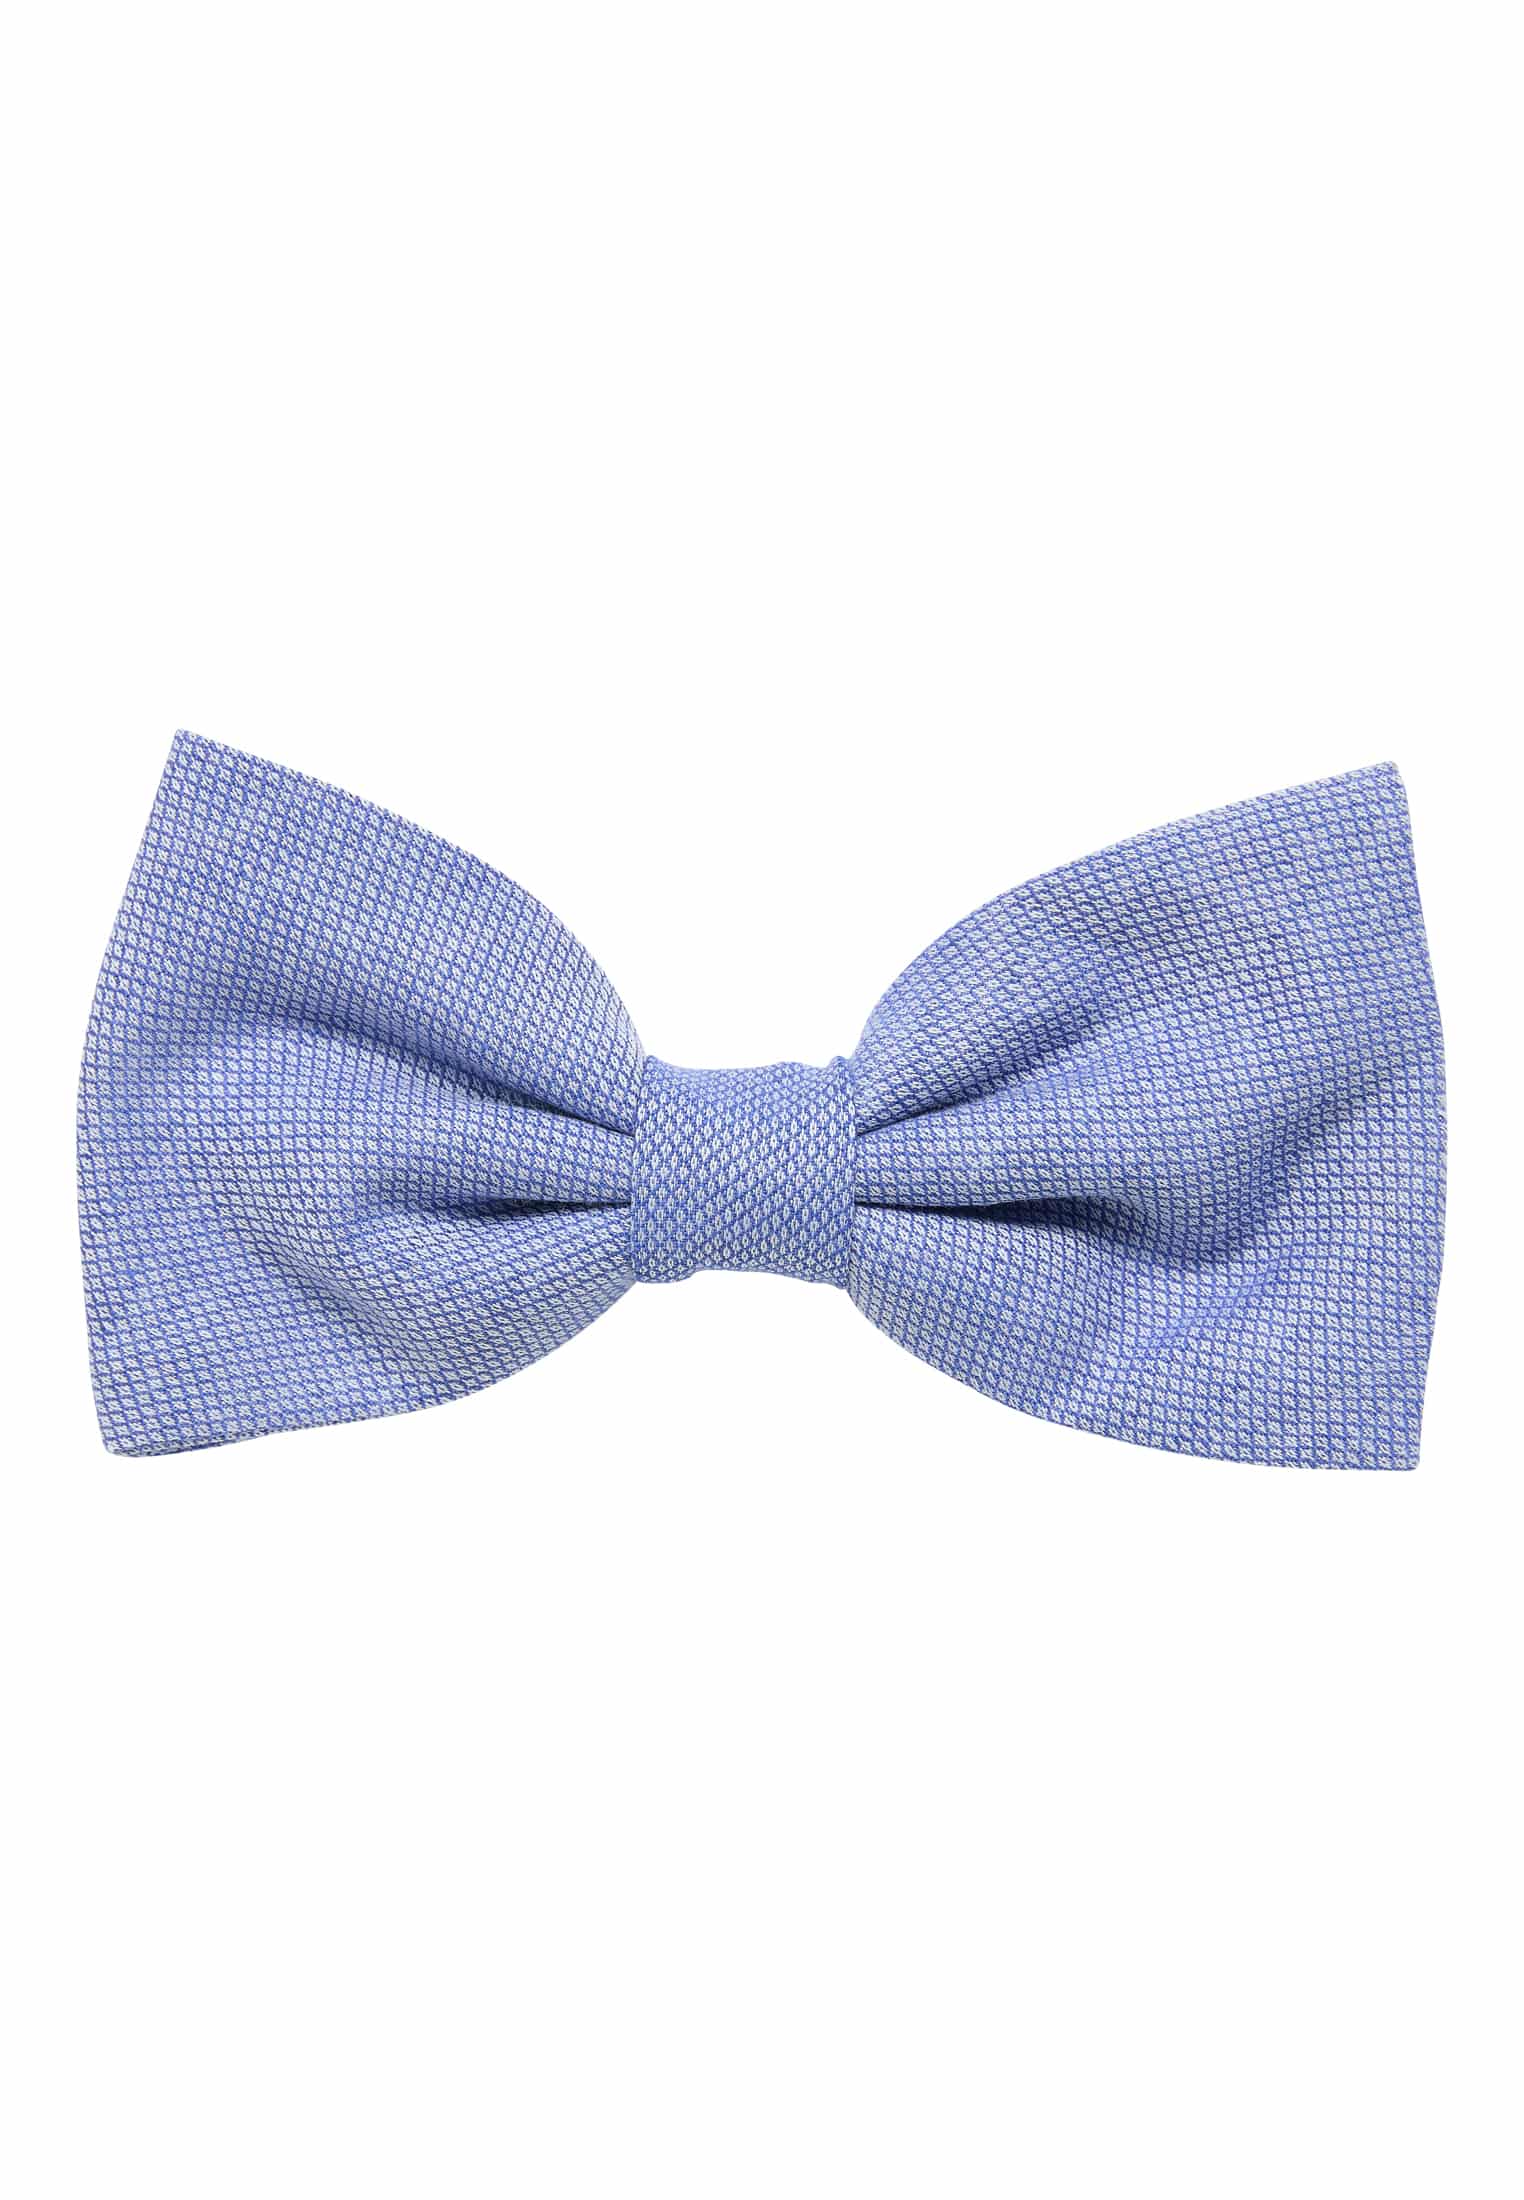 Bowtie in royal blue structured